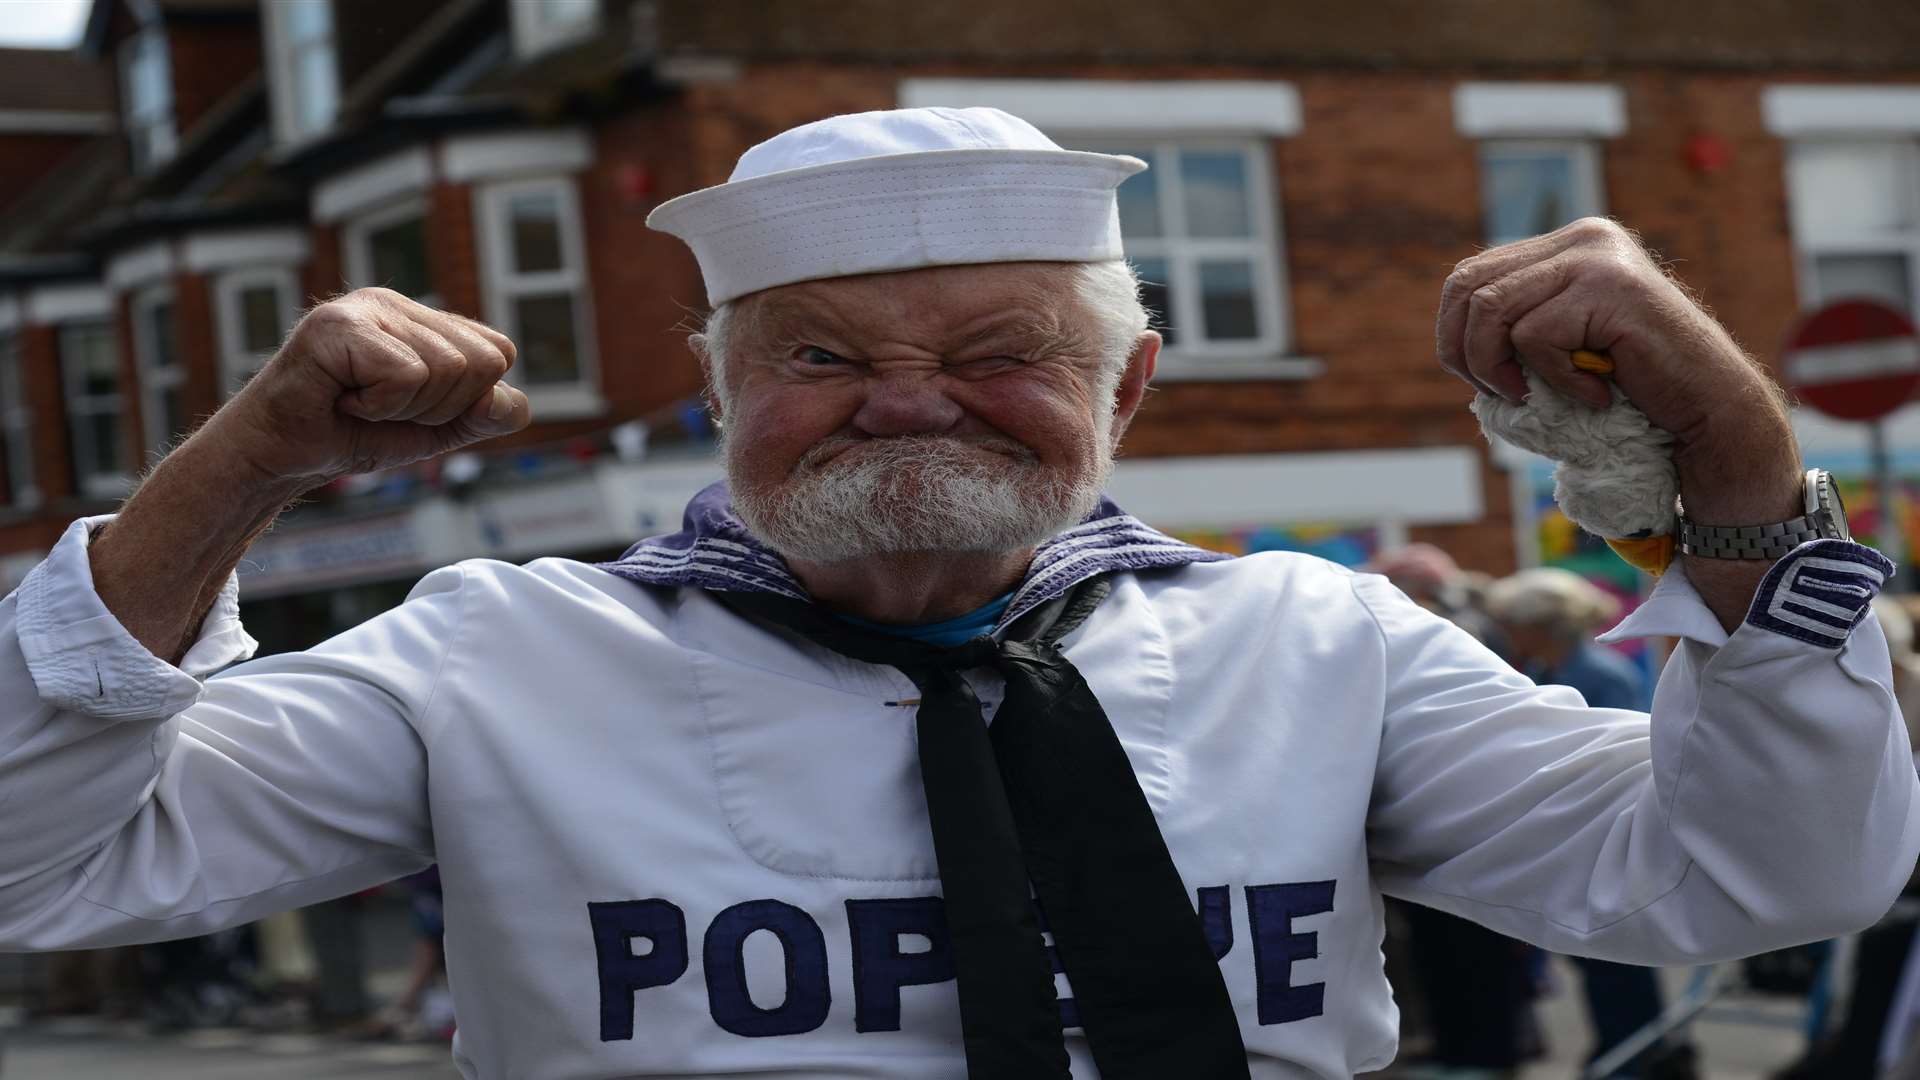 Popeye at New Romney Country Fayre